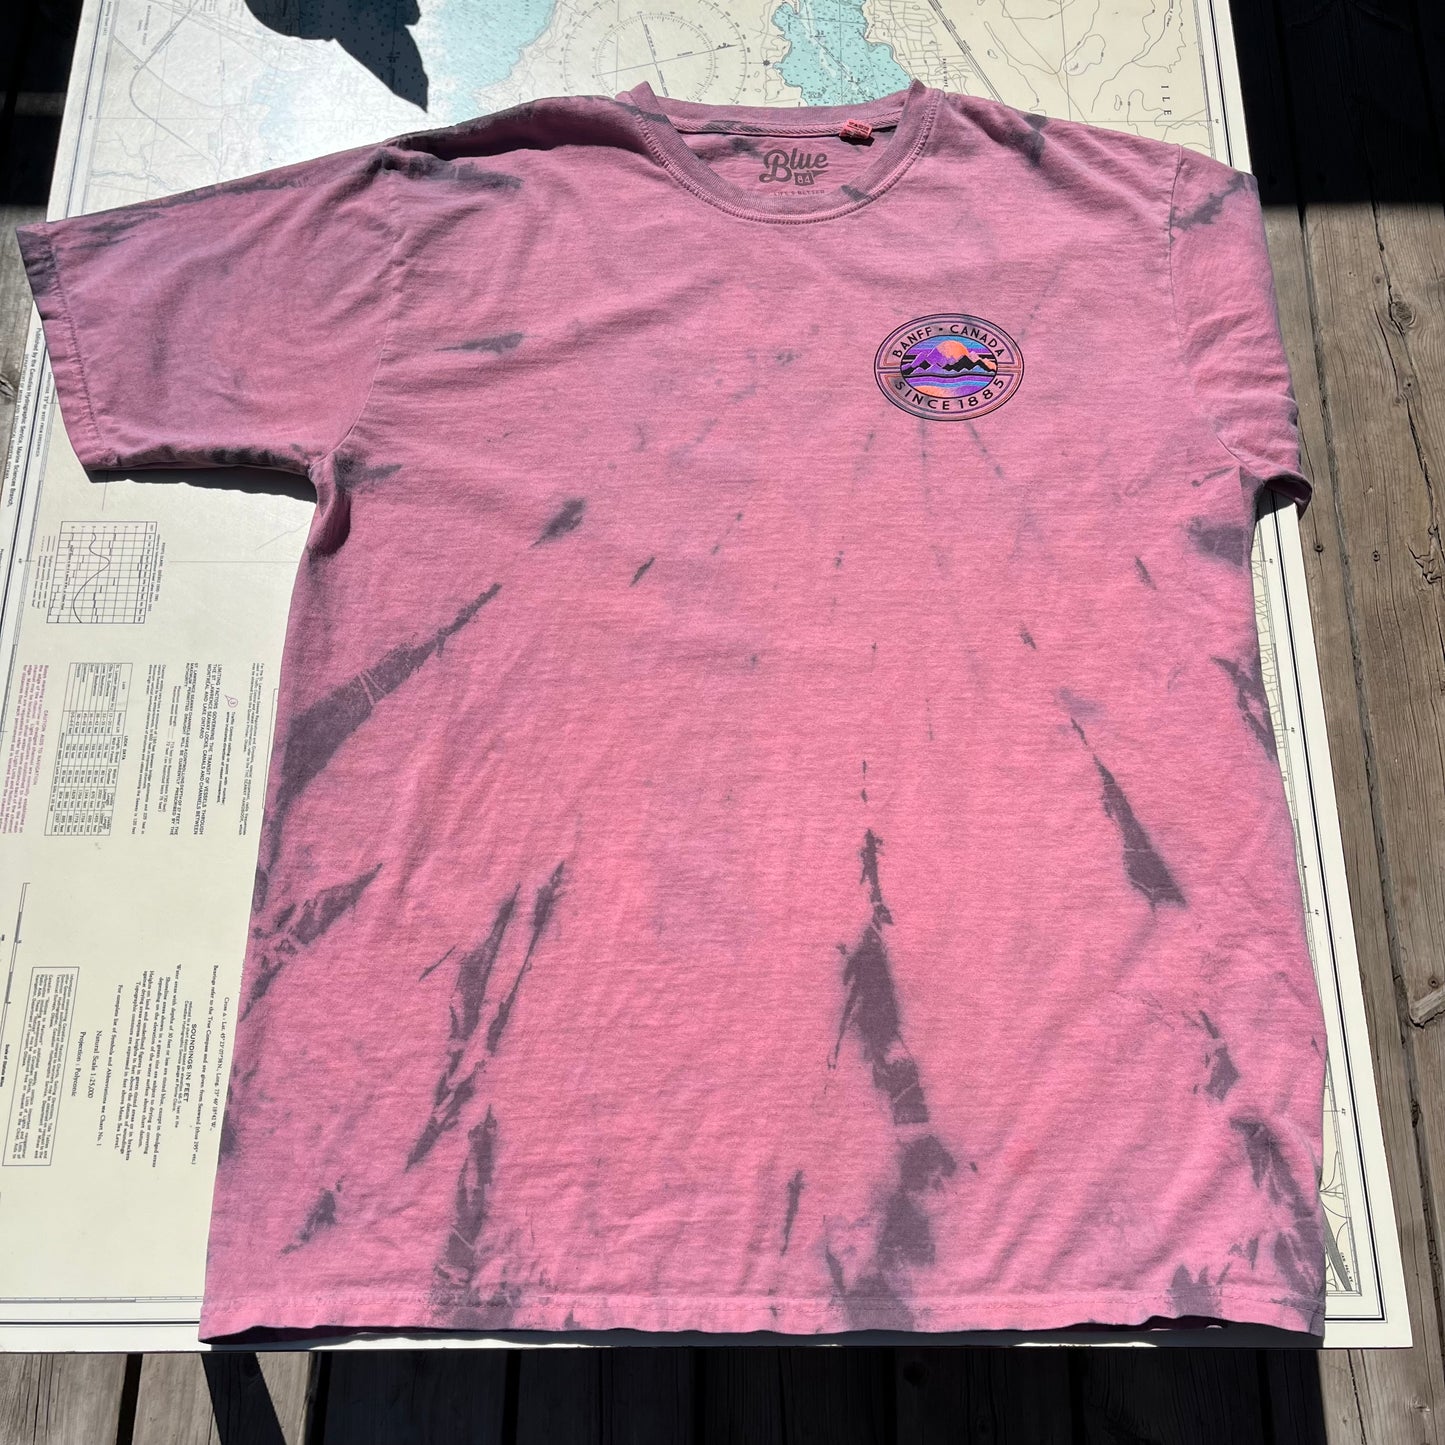 Upcycled Tie Dye Banff Canada Graphic Tee